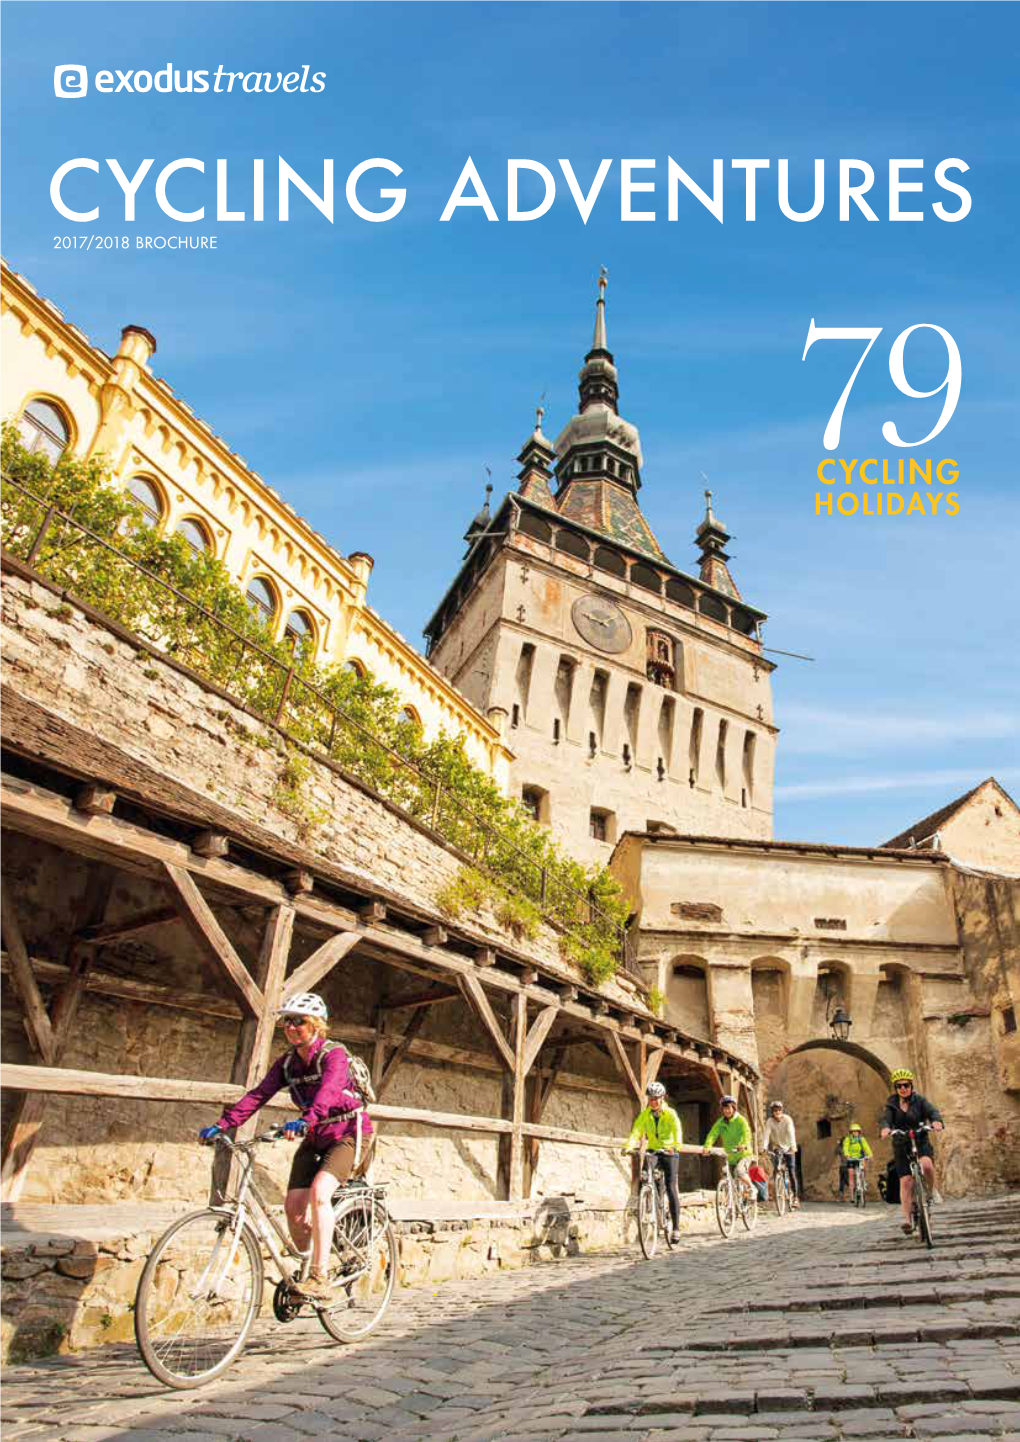 CYCLING ADVENTURES 2017/2018 BROCHURE 79 CYCLING HOLIDAYS 2 Introduction 3